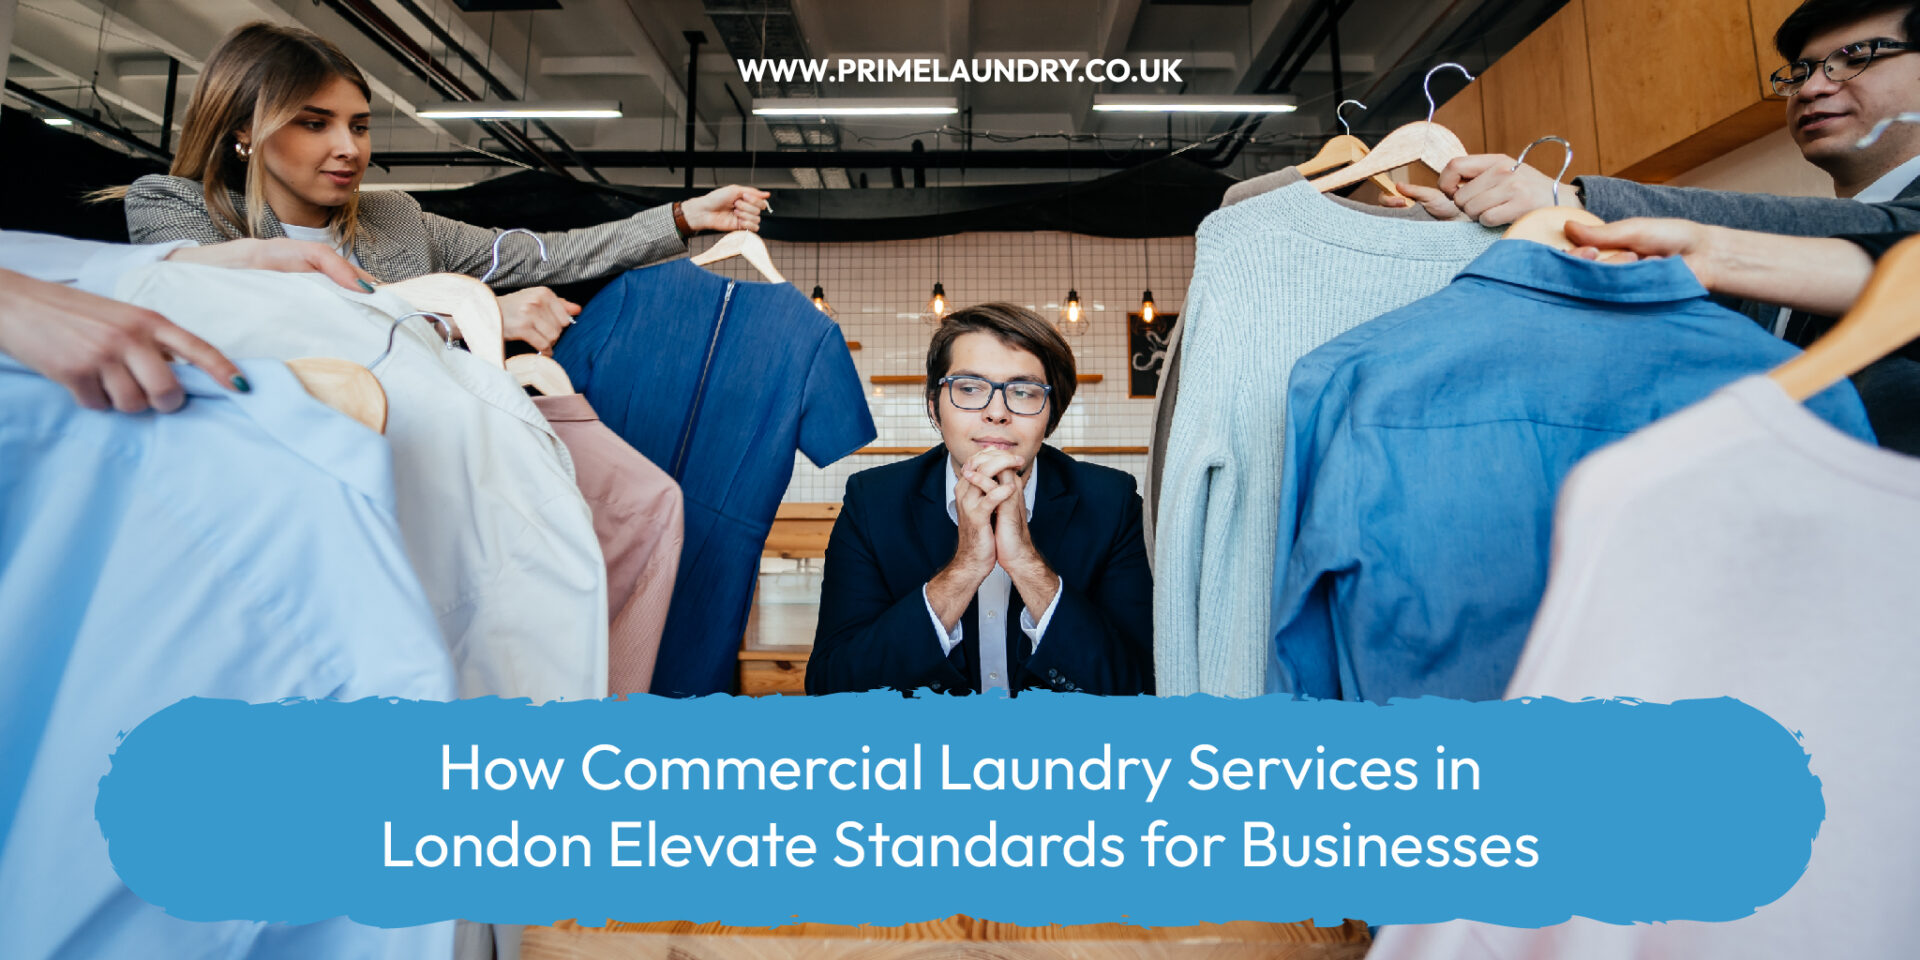 How Commercial Laundry Services in London Elevate Standards for Businesses